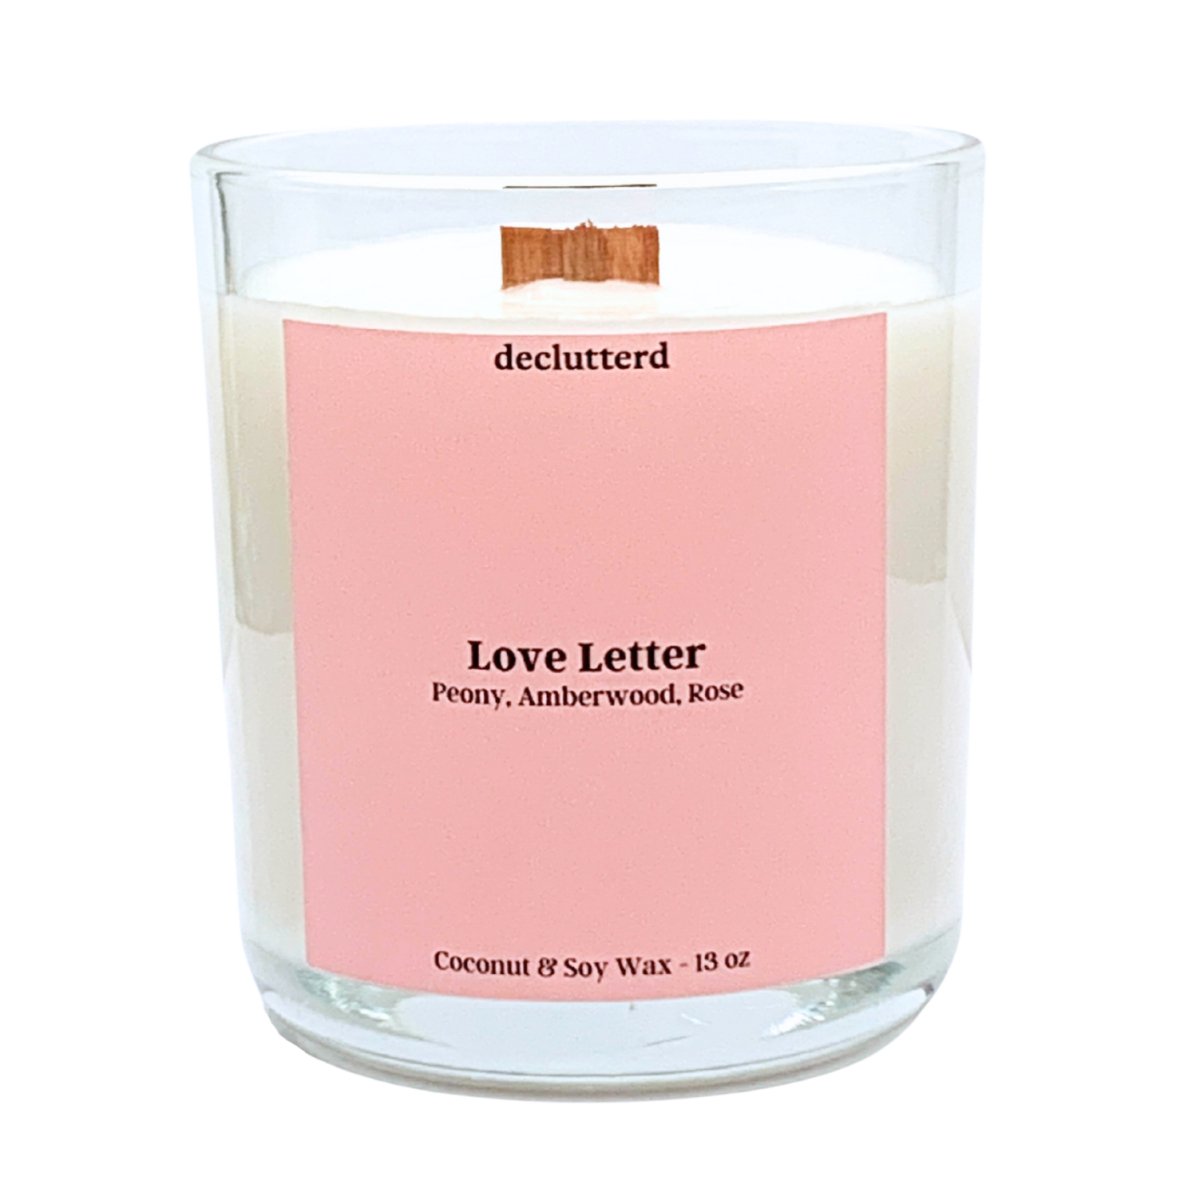 Love Letter Wood Wick Candle